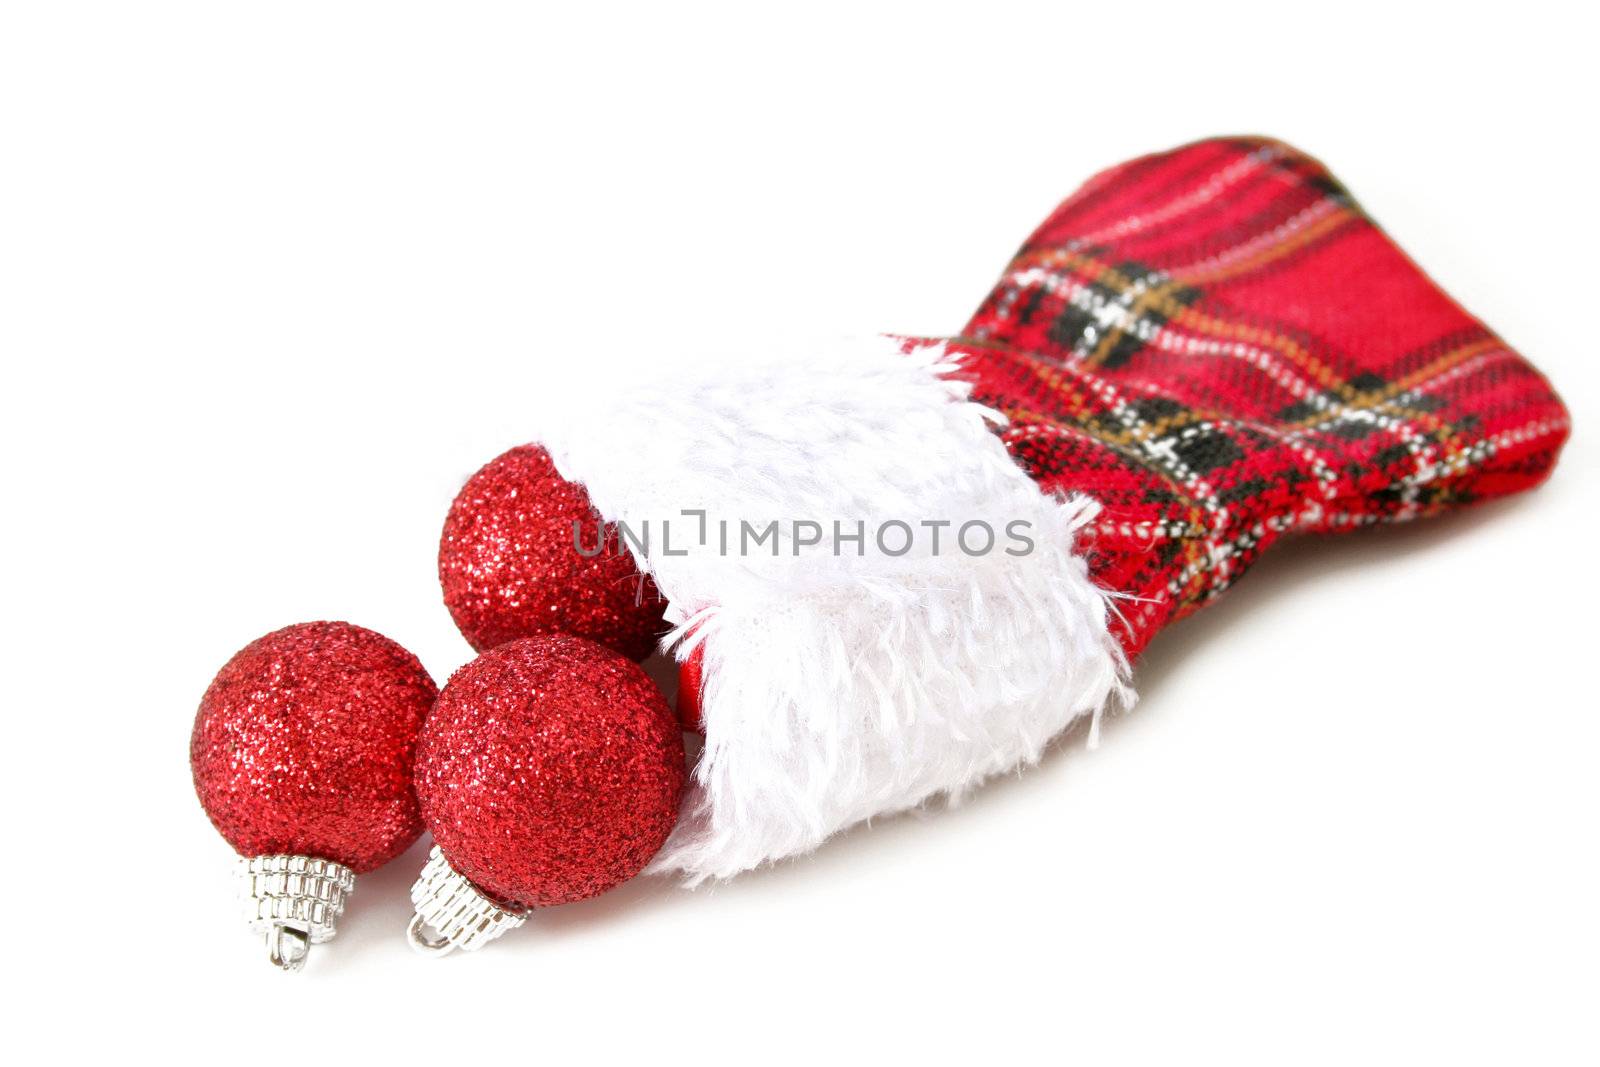 A Christmas stocking in plaid with red decorations spilling out on a white background with copy space.